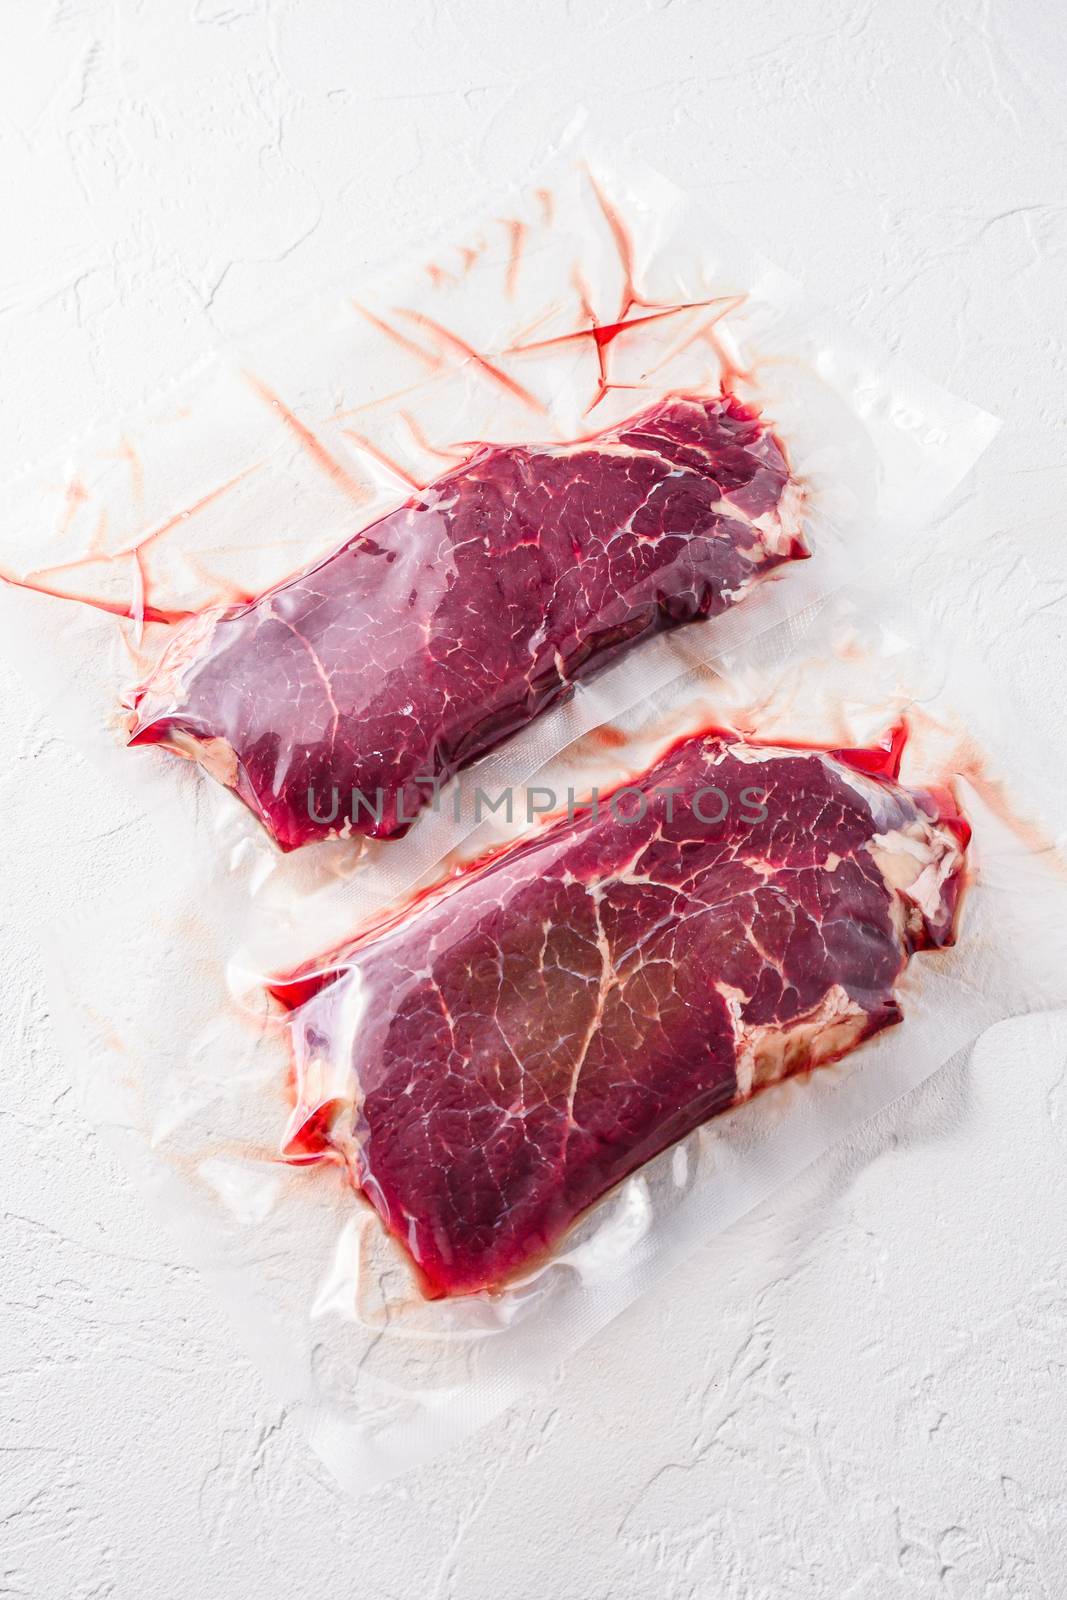 Set of vacuum packed organic beef meat rump steak on white concrete textured background, side view